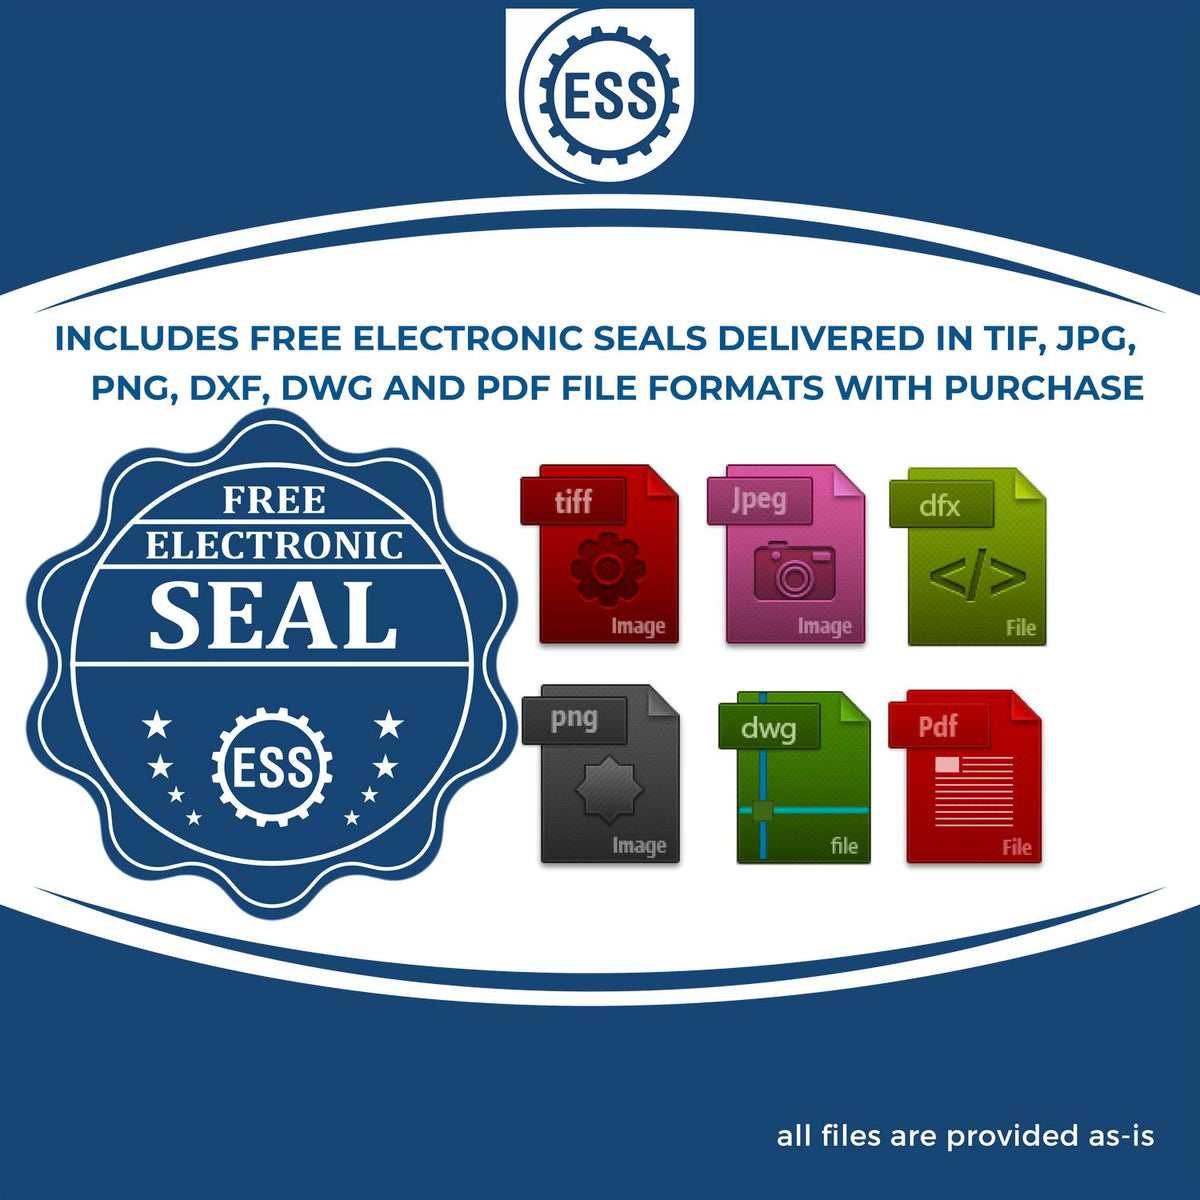 An infographic for the free electronic seal for the Self-Inking Ohio Geologist Stamp illustrating the different file type icons such as DXF, DWG, TIF, JPG and PNG.